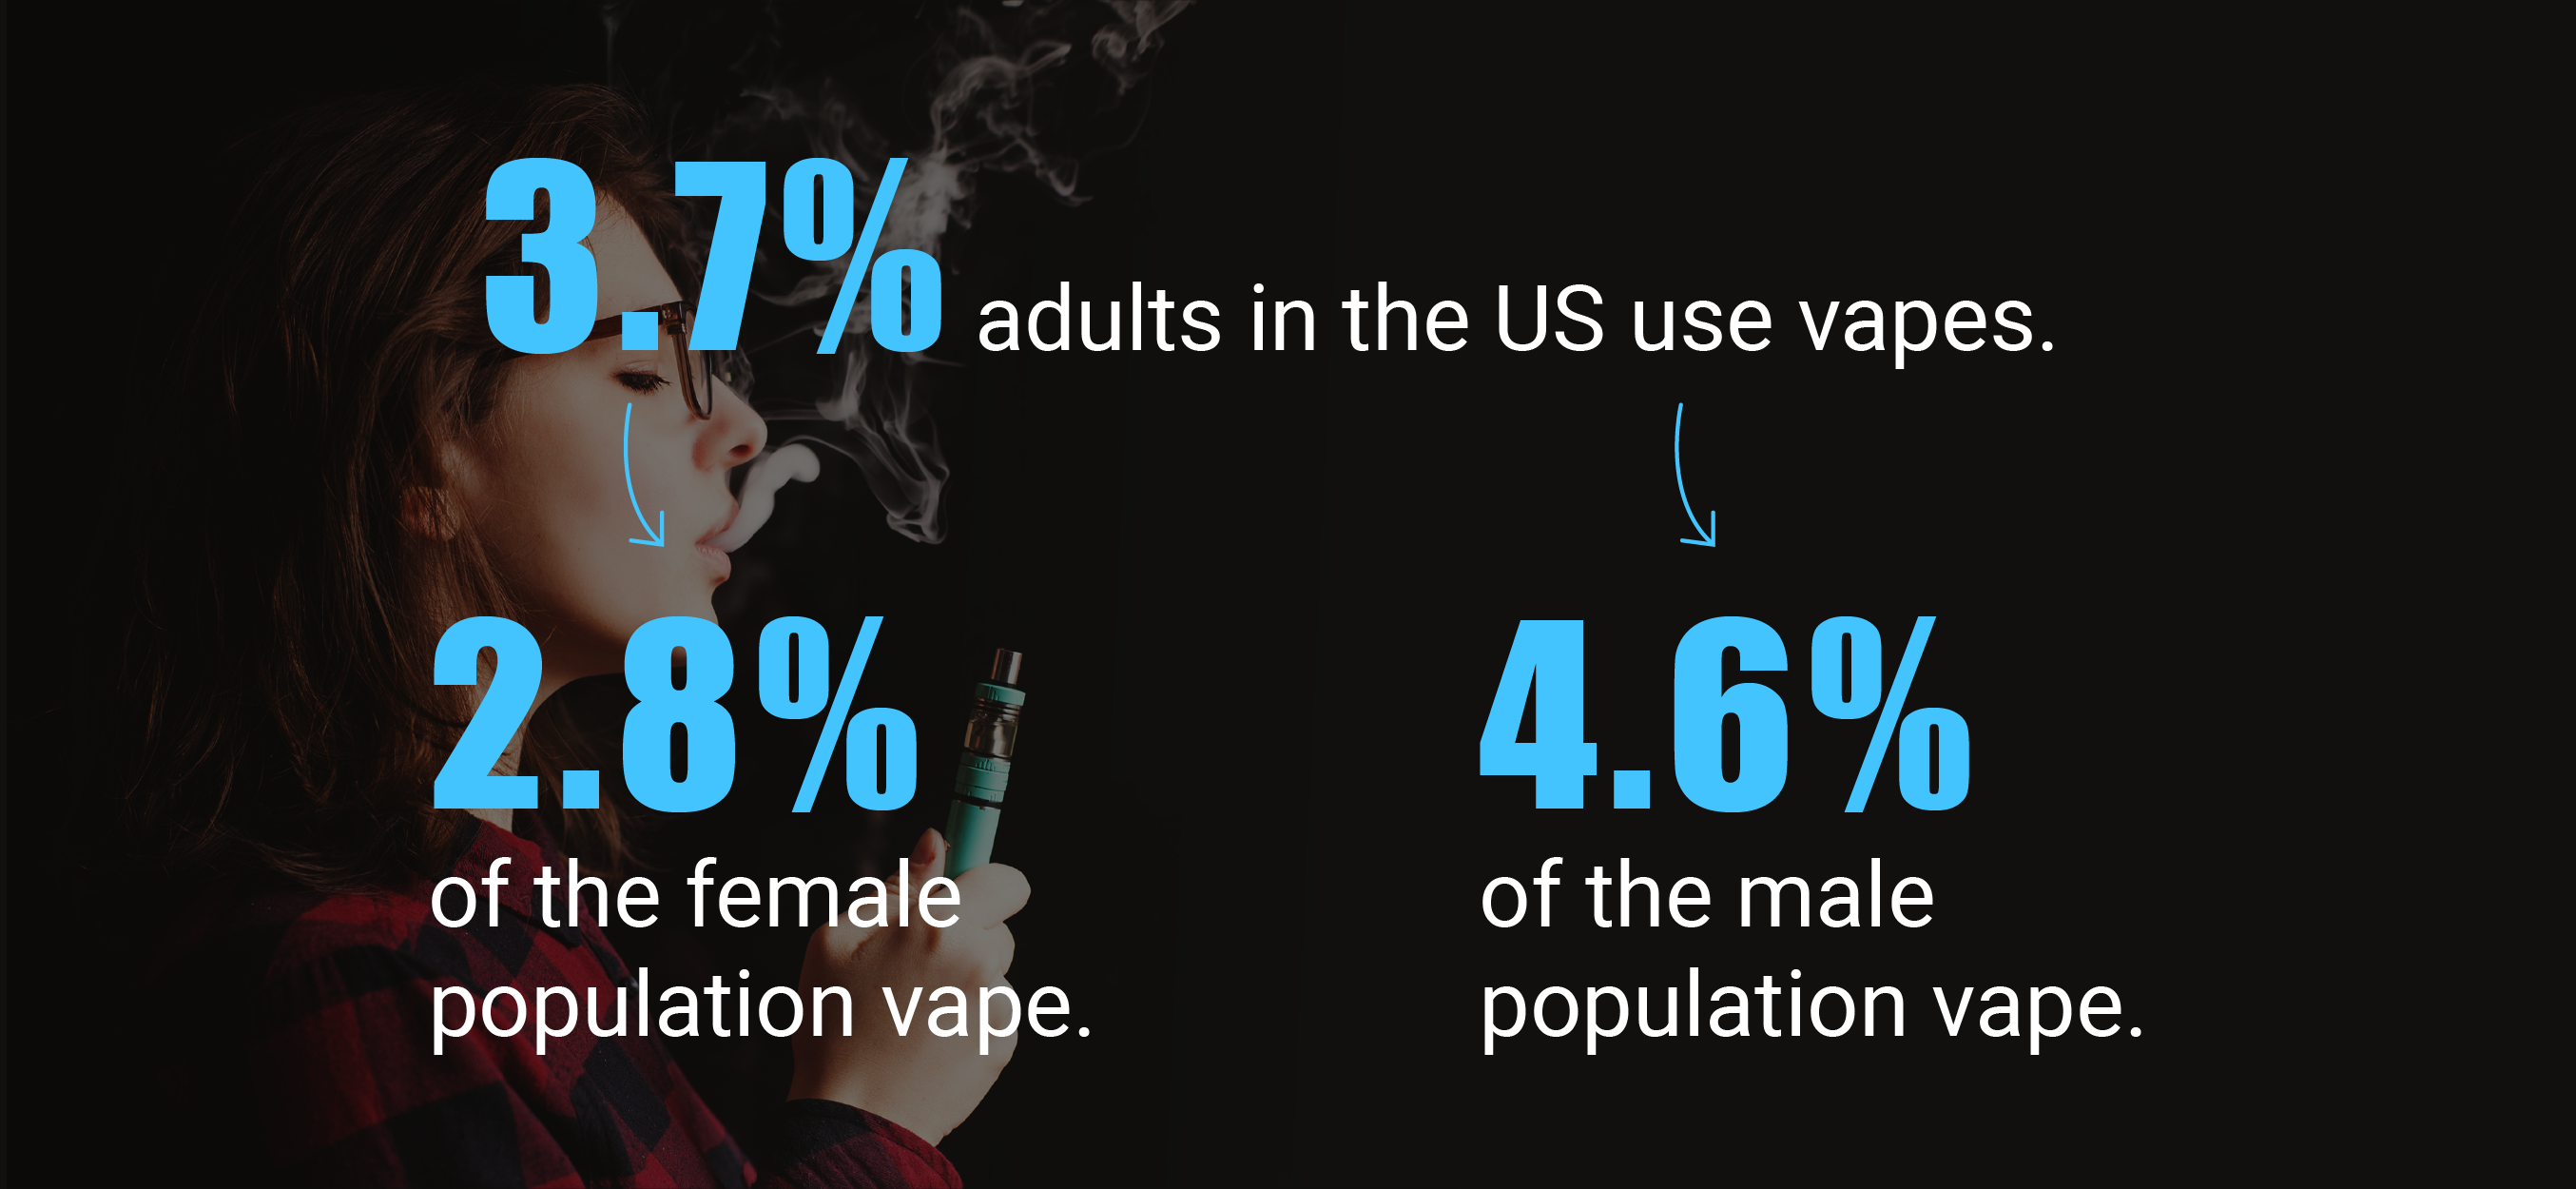 Call out text box showing the prevalence of vaping among adults, with more men vaping than women.